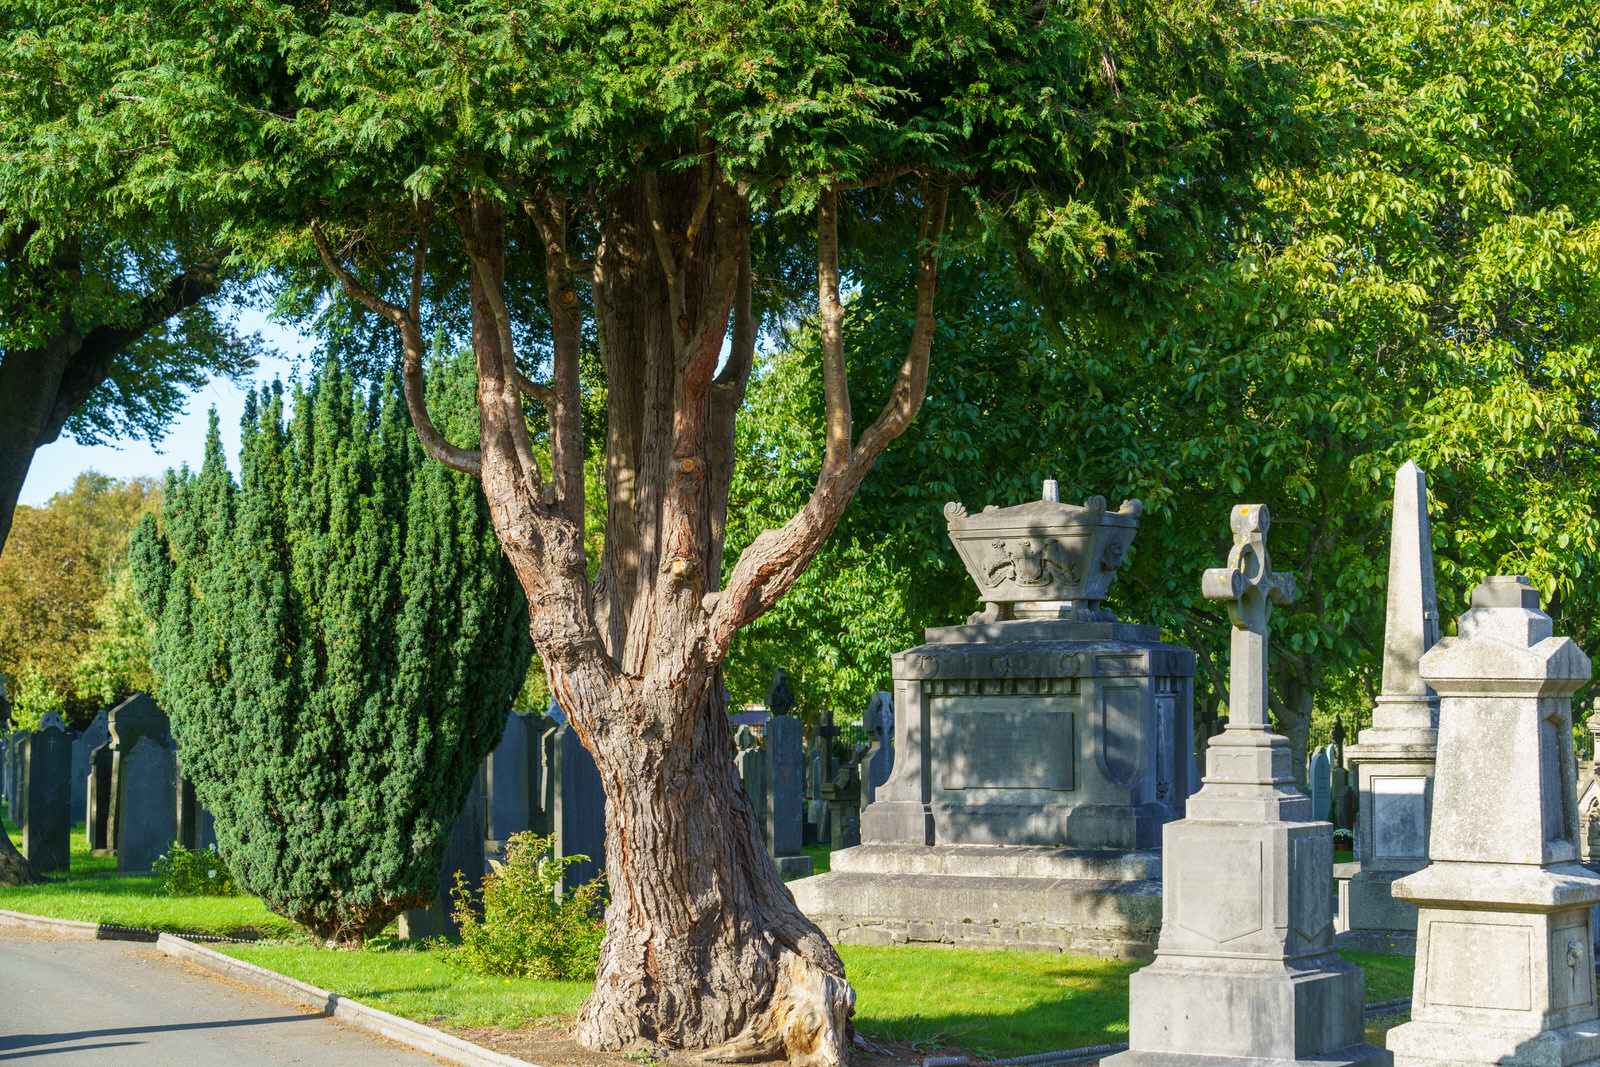 THE OLDER SECTION OF GLASNEVIN CEMETERY [I USED A SONY 70-200MM GM LENS] 015